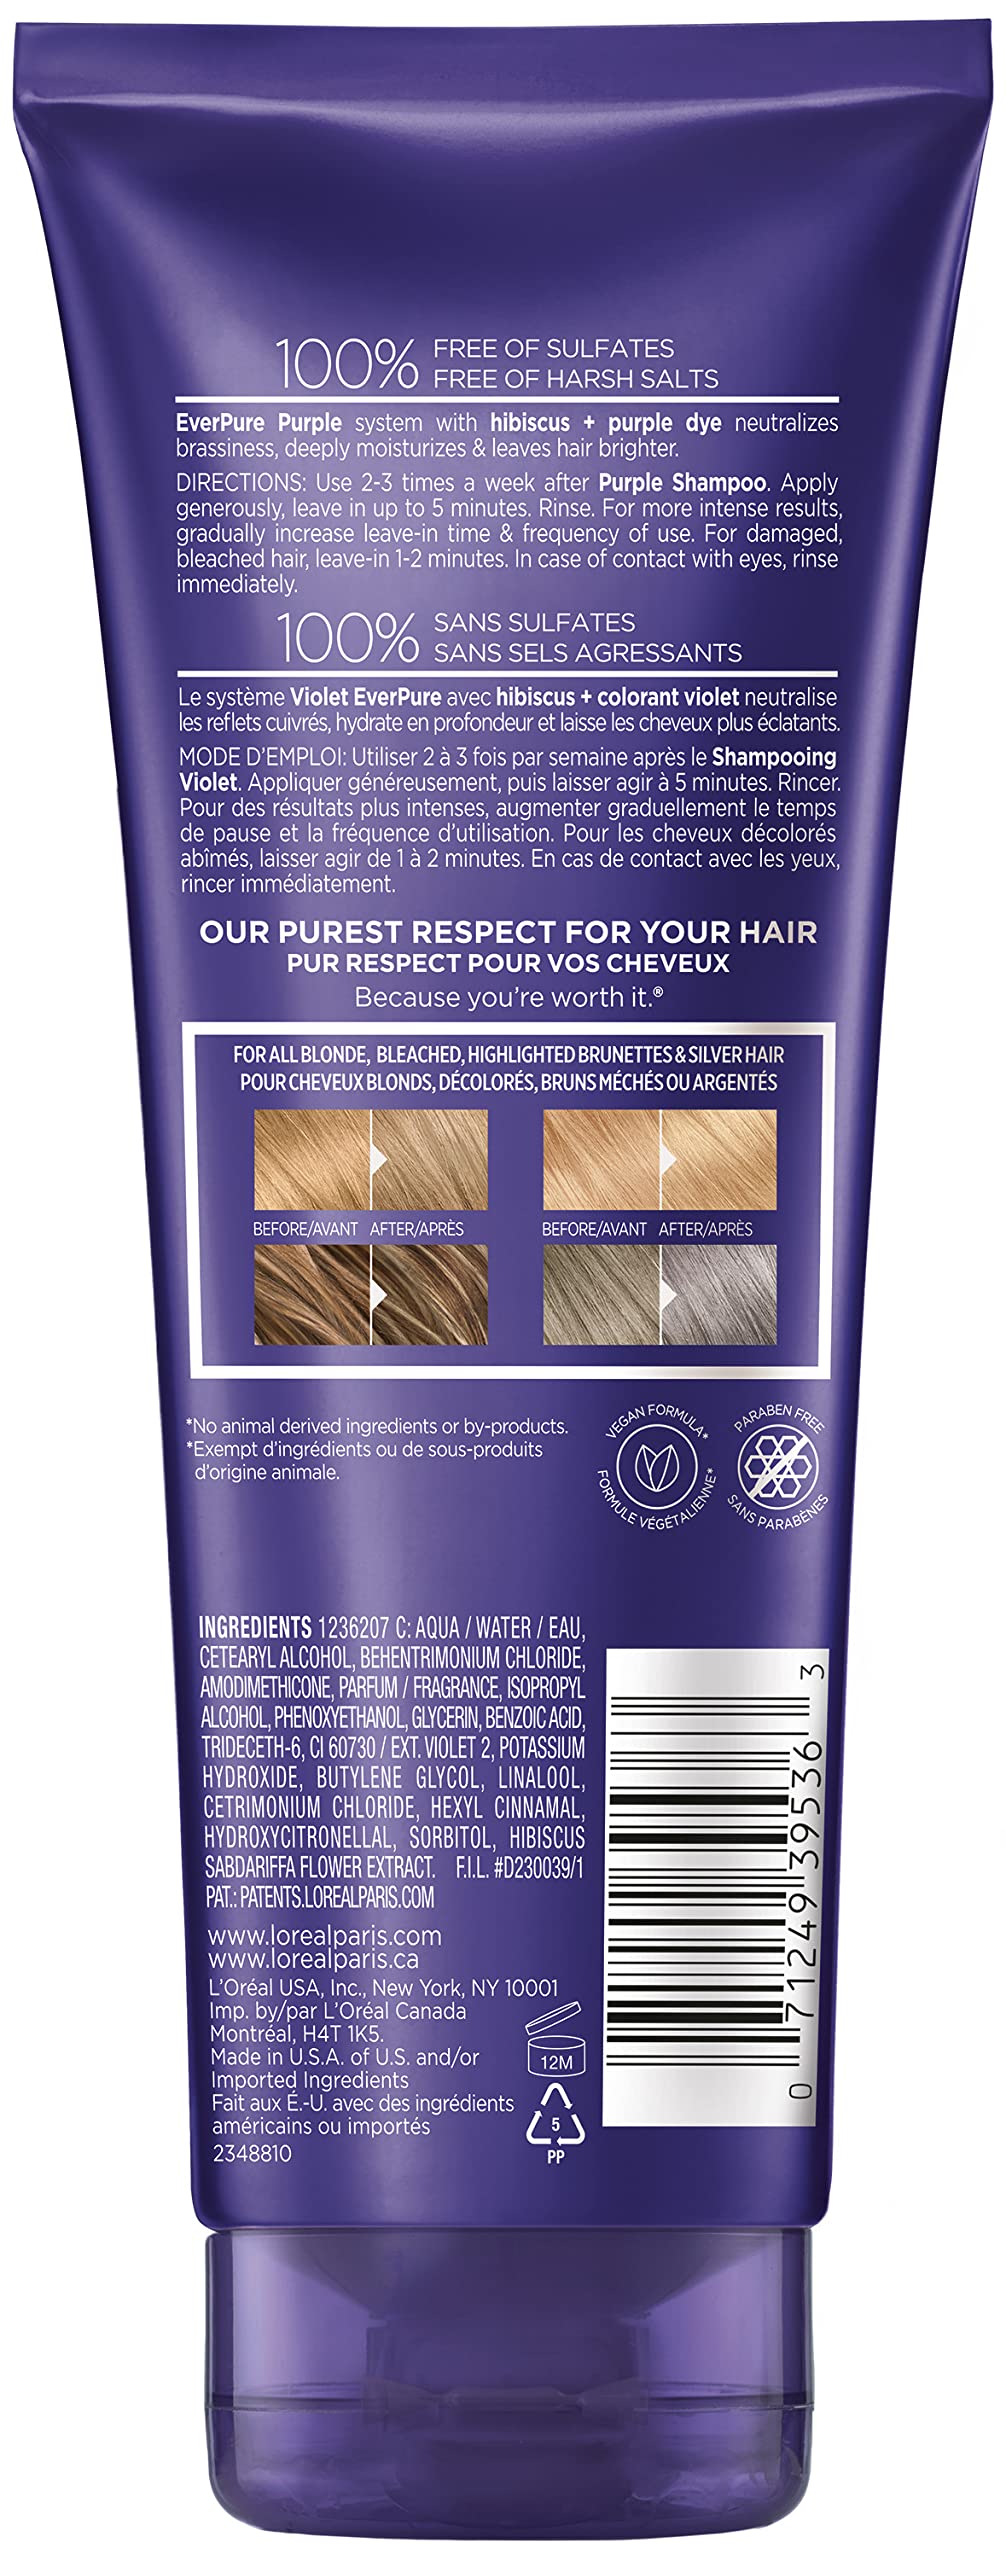 L'Oreal Paris Hair Care EverPure Sulfate Free Brass Toning Purple Conditioner for Blonde, Bleached, Silver, or Brown Highlighted Hair, 6.8 Fl. Oz.